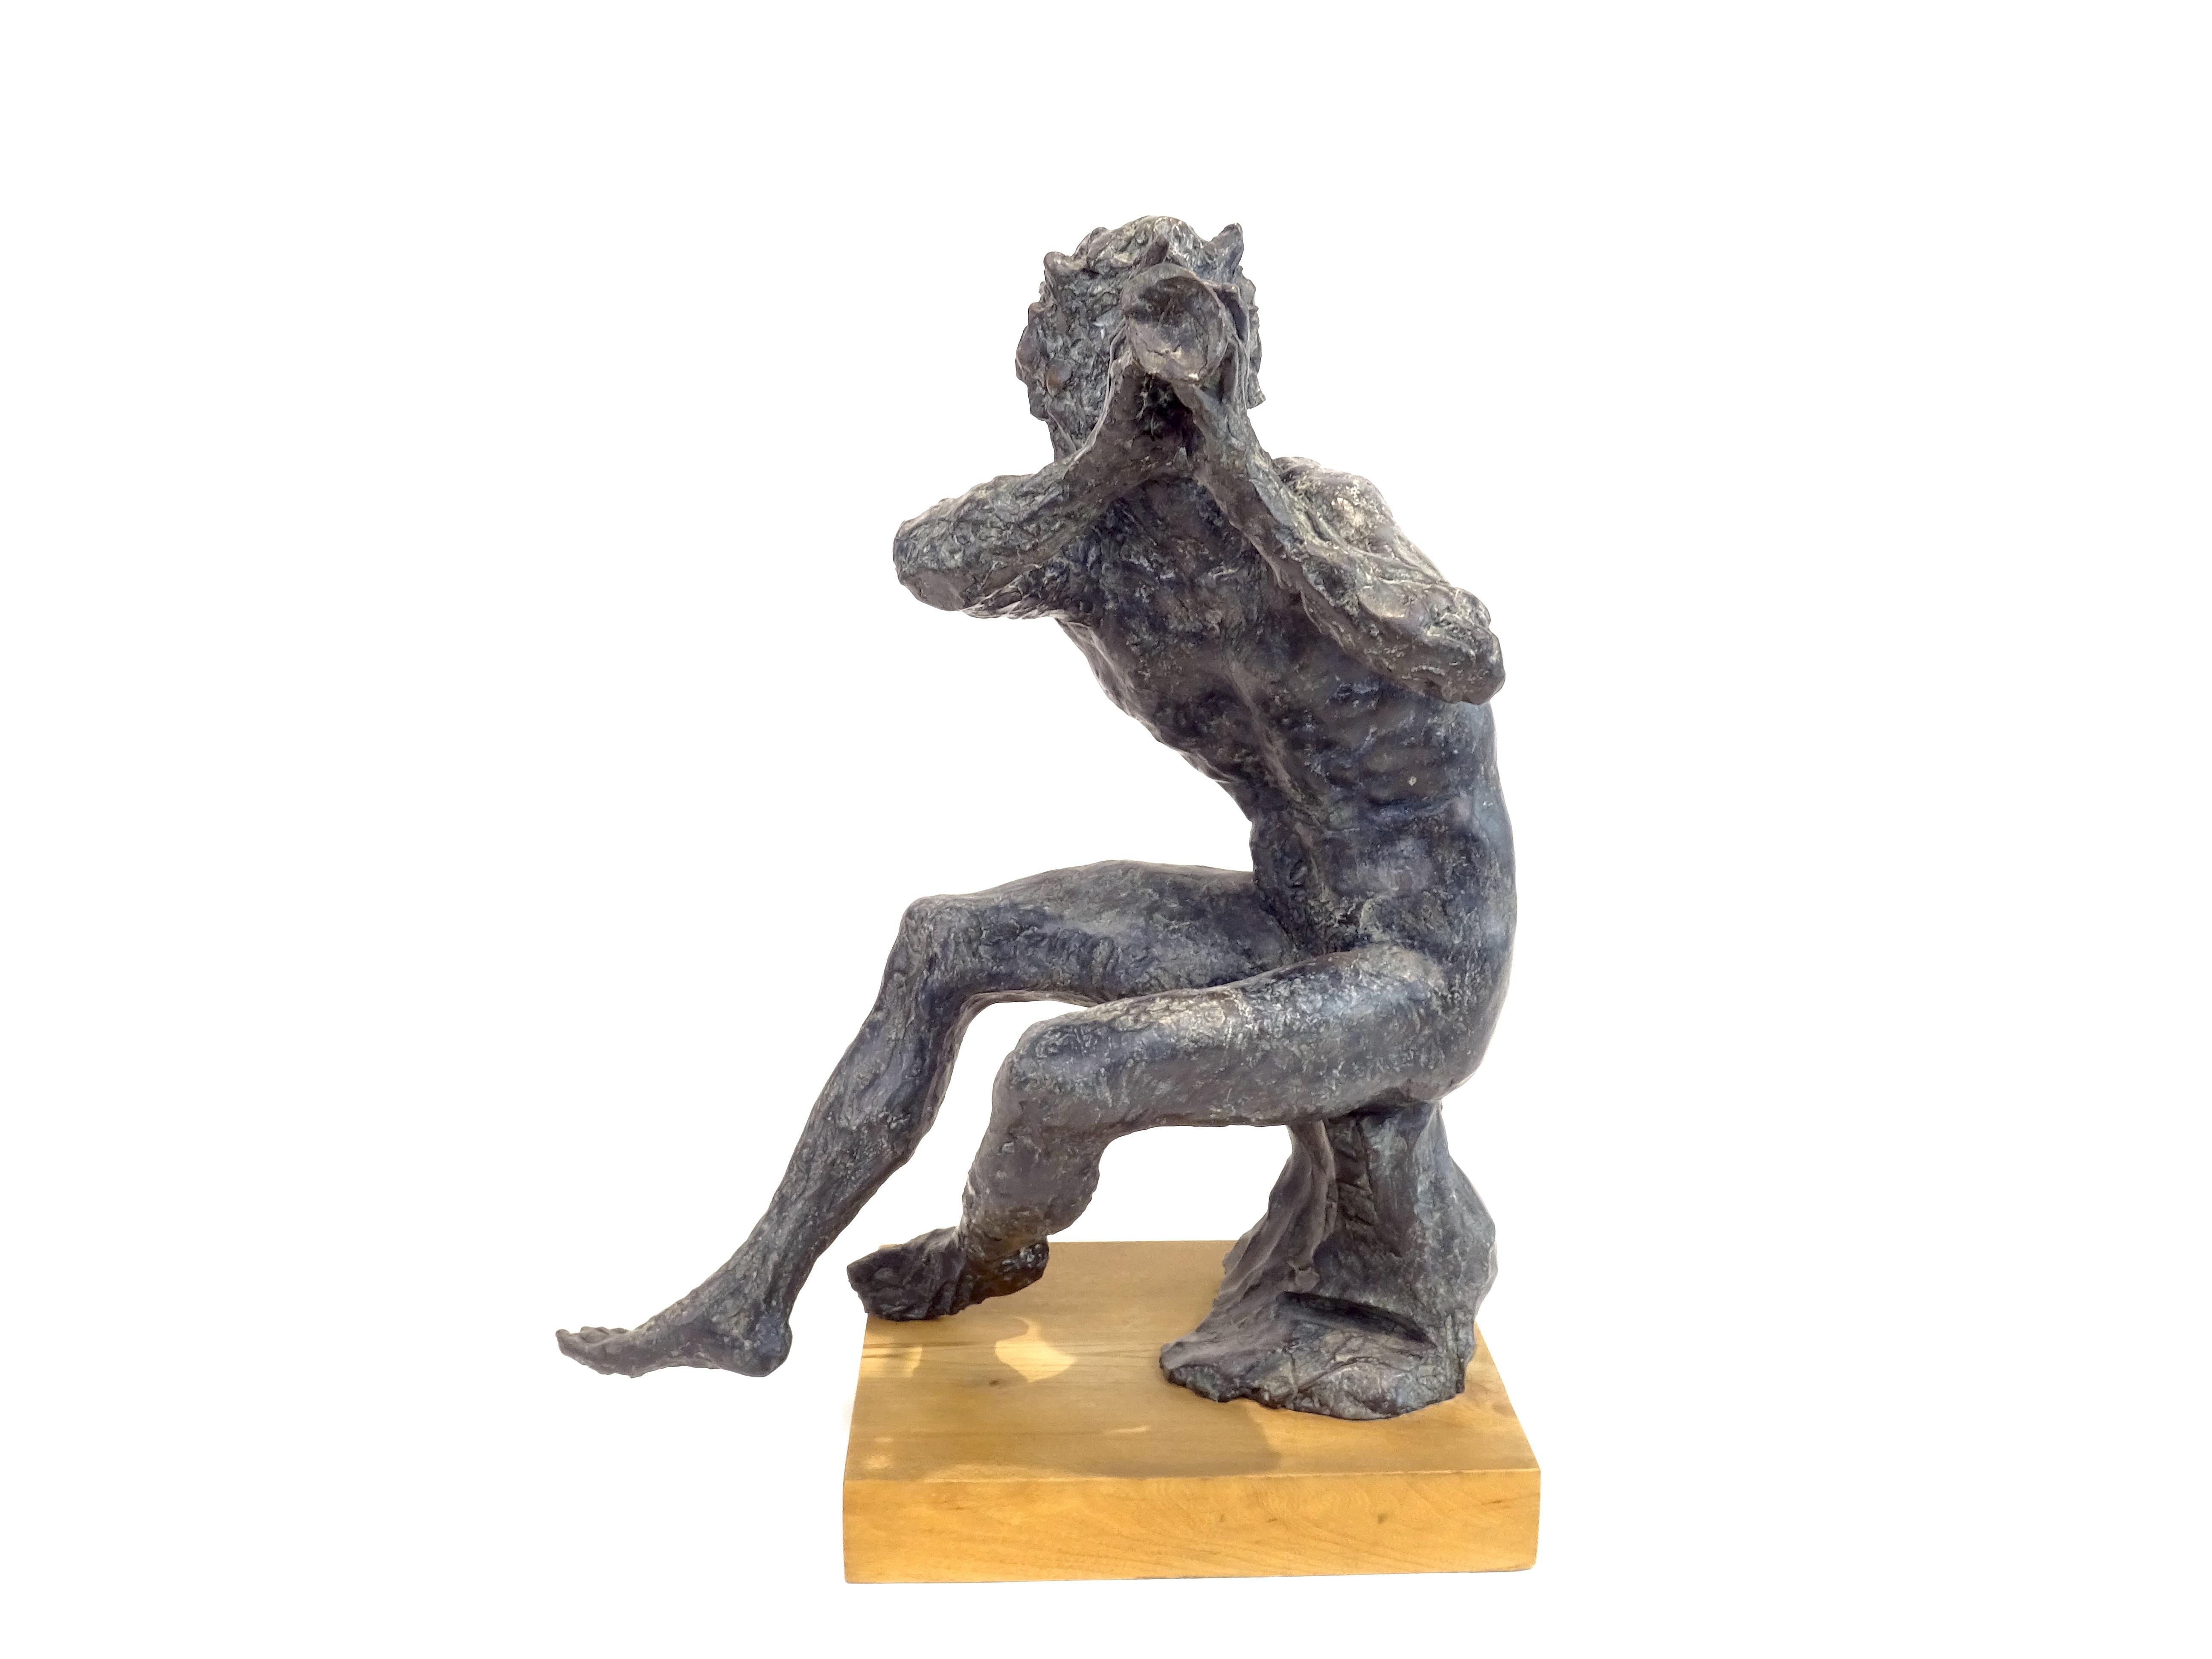 Sculpture made of bronze using the lost wax technique. The work is Augusto Murer, one of the most important Italian sculptors of the mid-twentieth century, is titled 